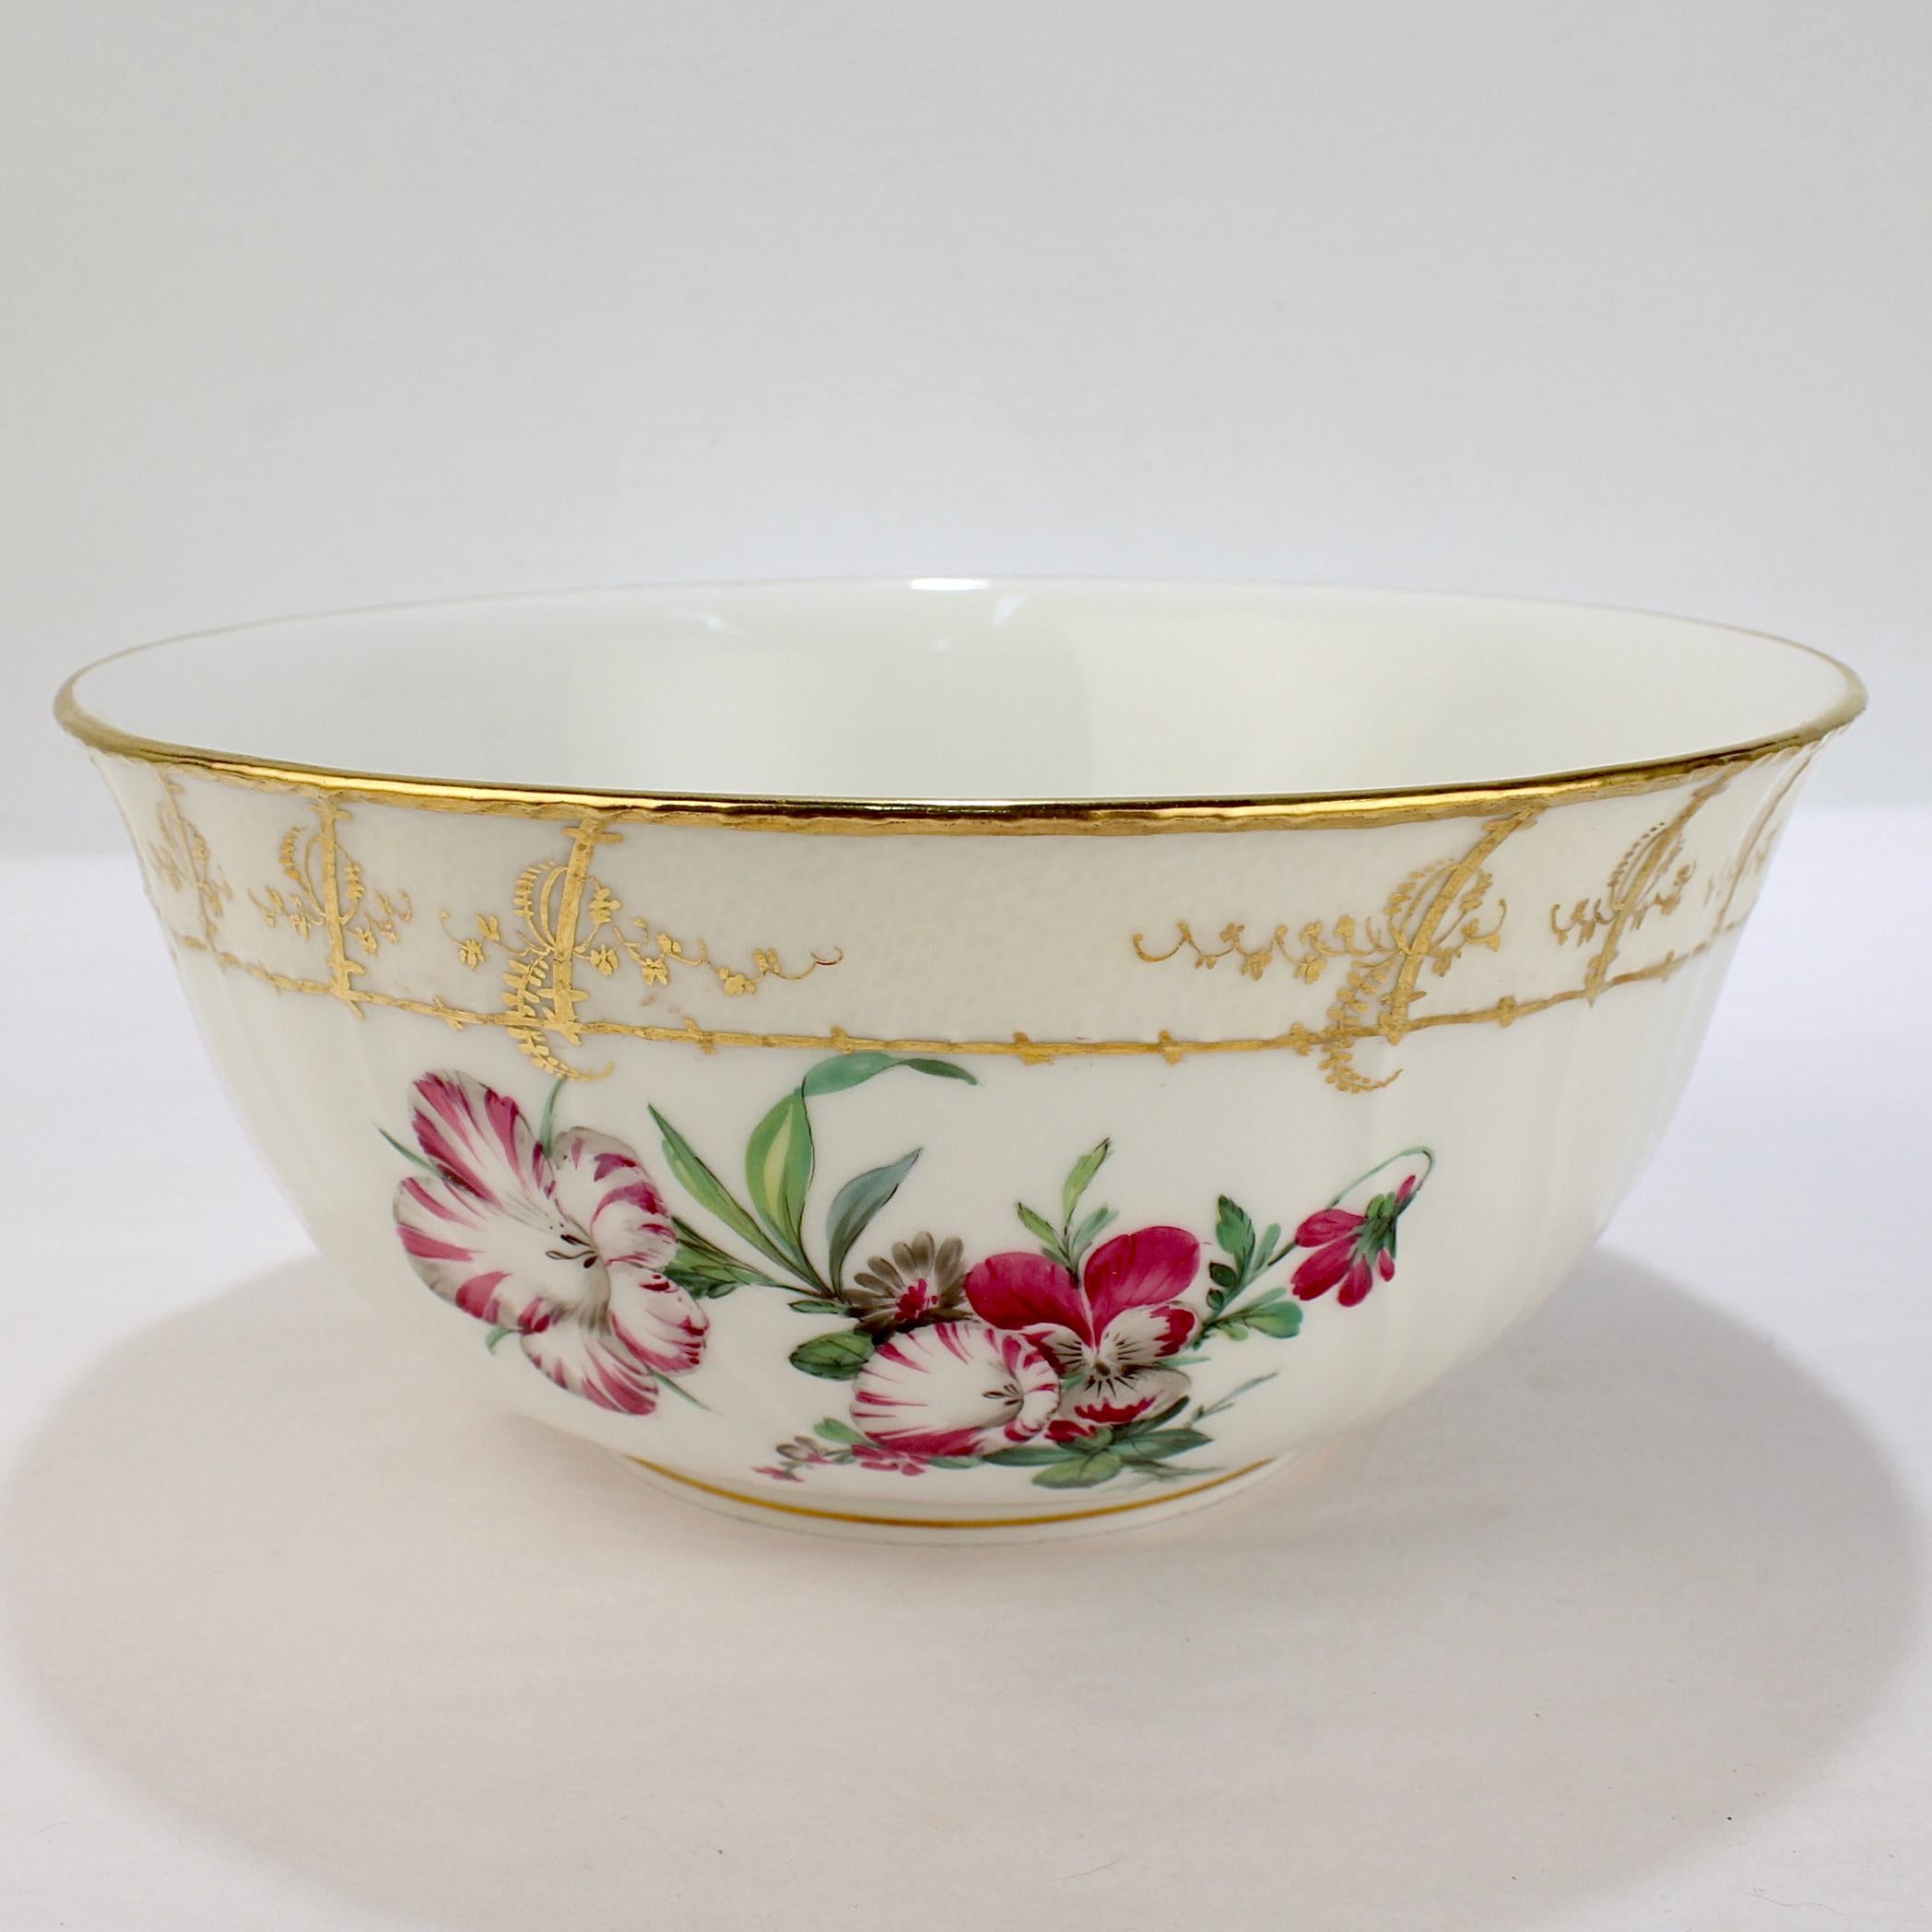 A fine antique porcelain Neuosier pattern fruit bowl.

By KPM (Königliche Porzellan-Manufaktur).

The bowl has a bouquet of purple & white pansies, trumpet flowers, and lilies to the front and a painted yellow border with rich gilding.